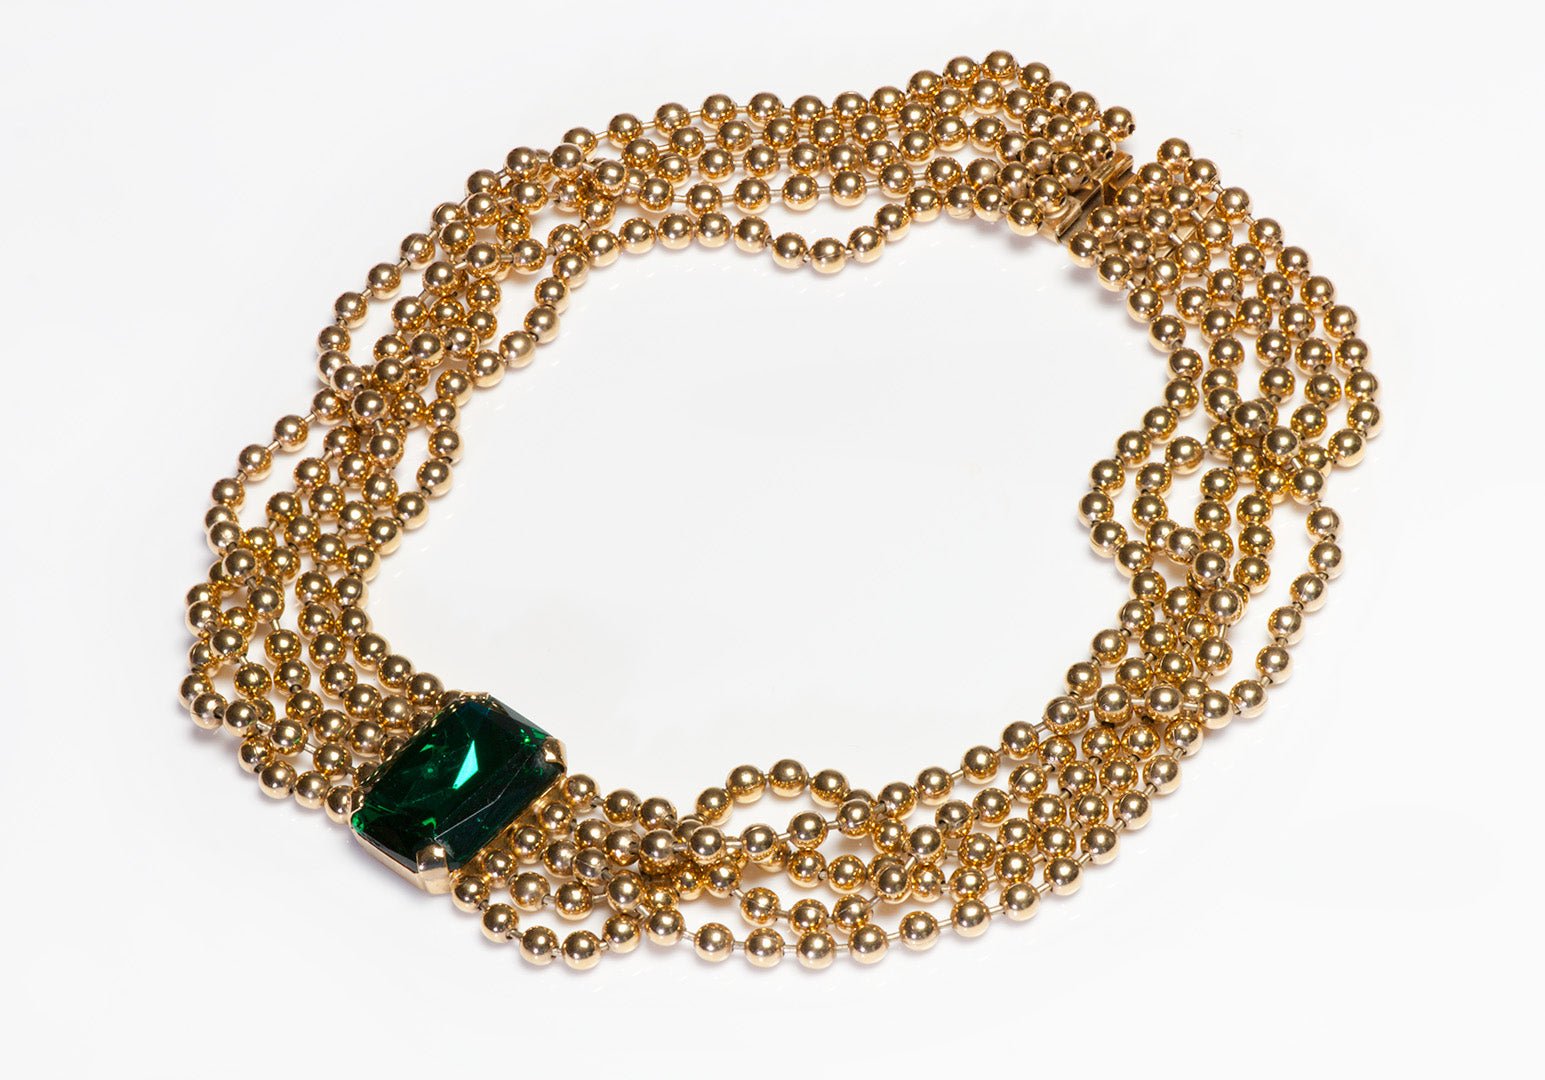 Vintage Gold Plated Beads Green Crystal Collar Necklace